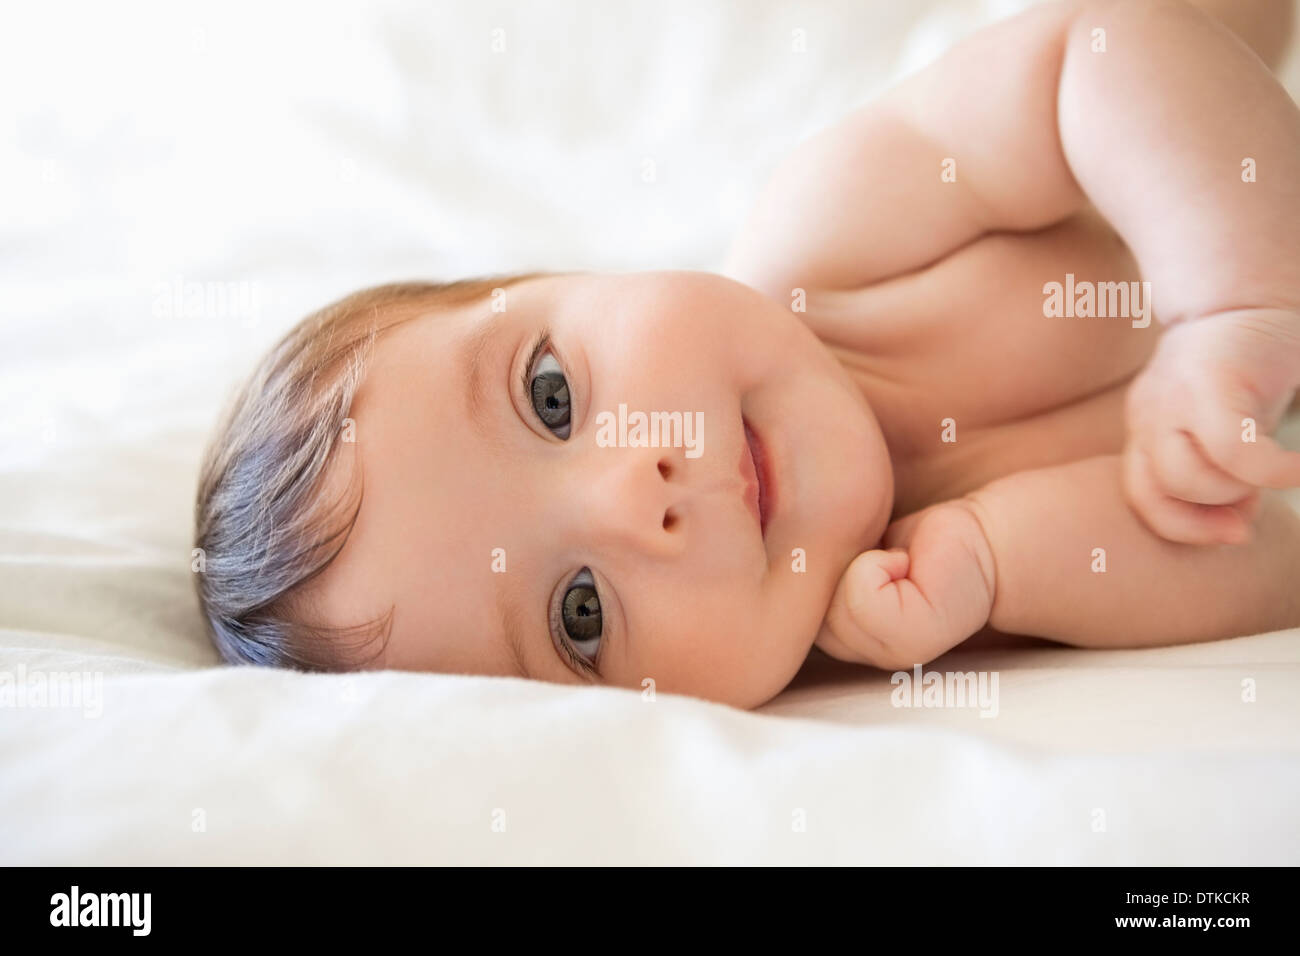 Baby girl laying on bed Stock Photo